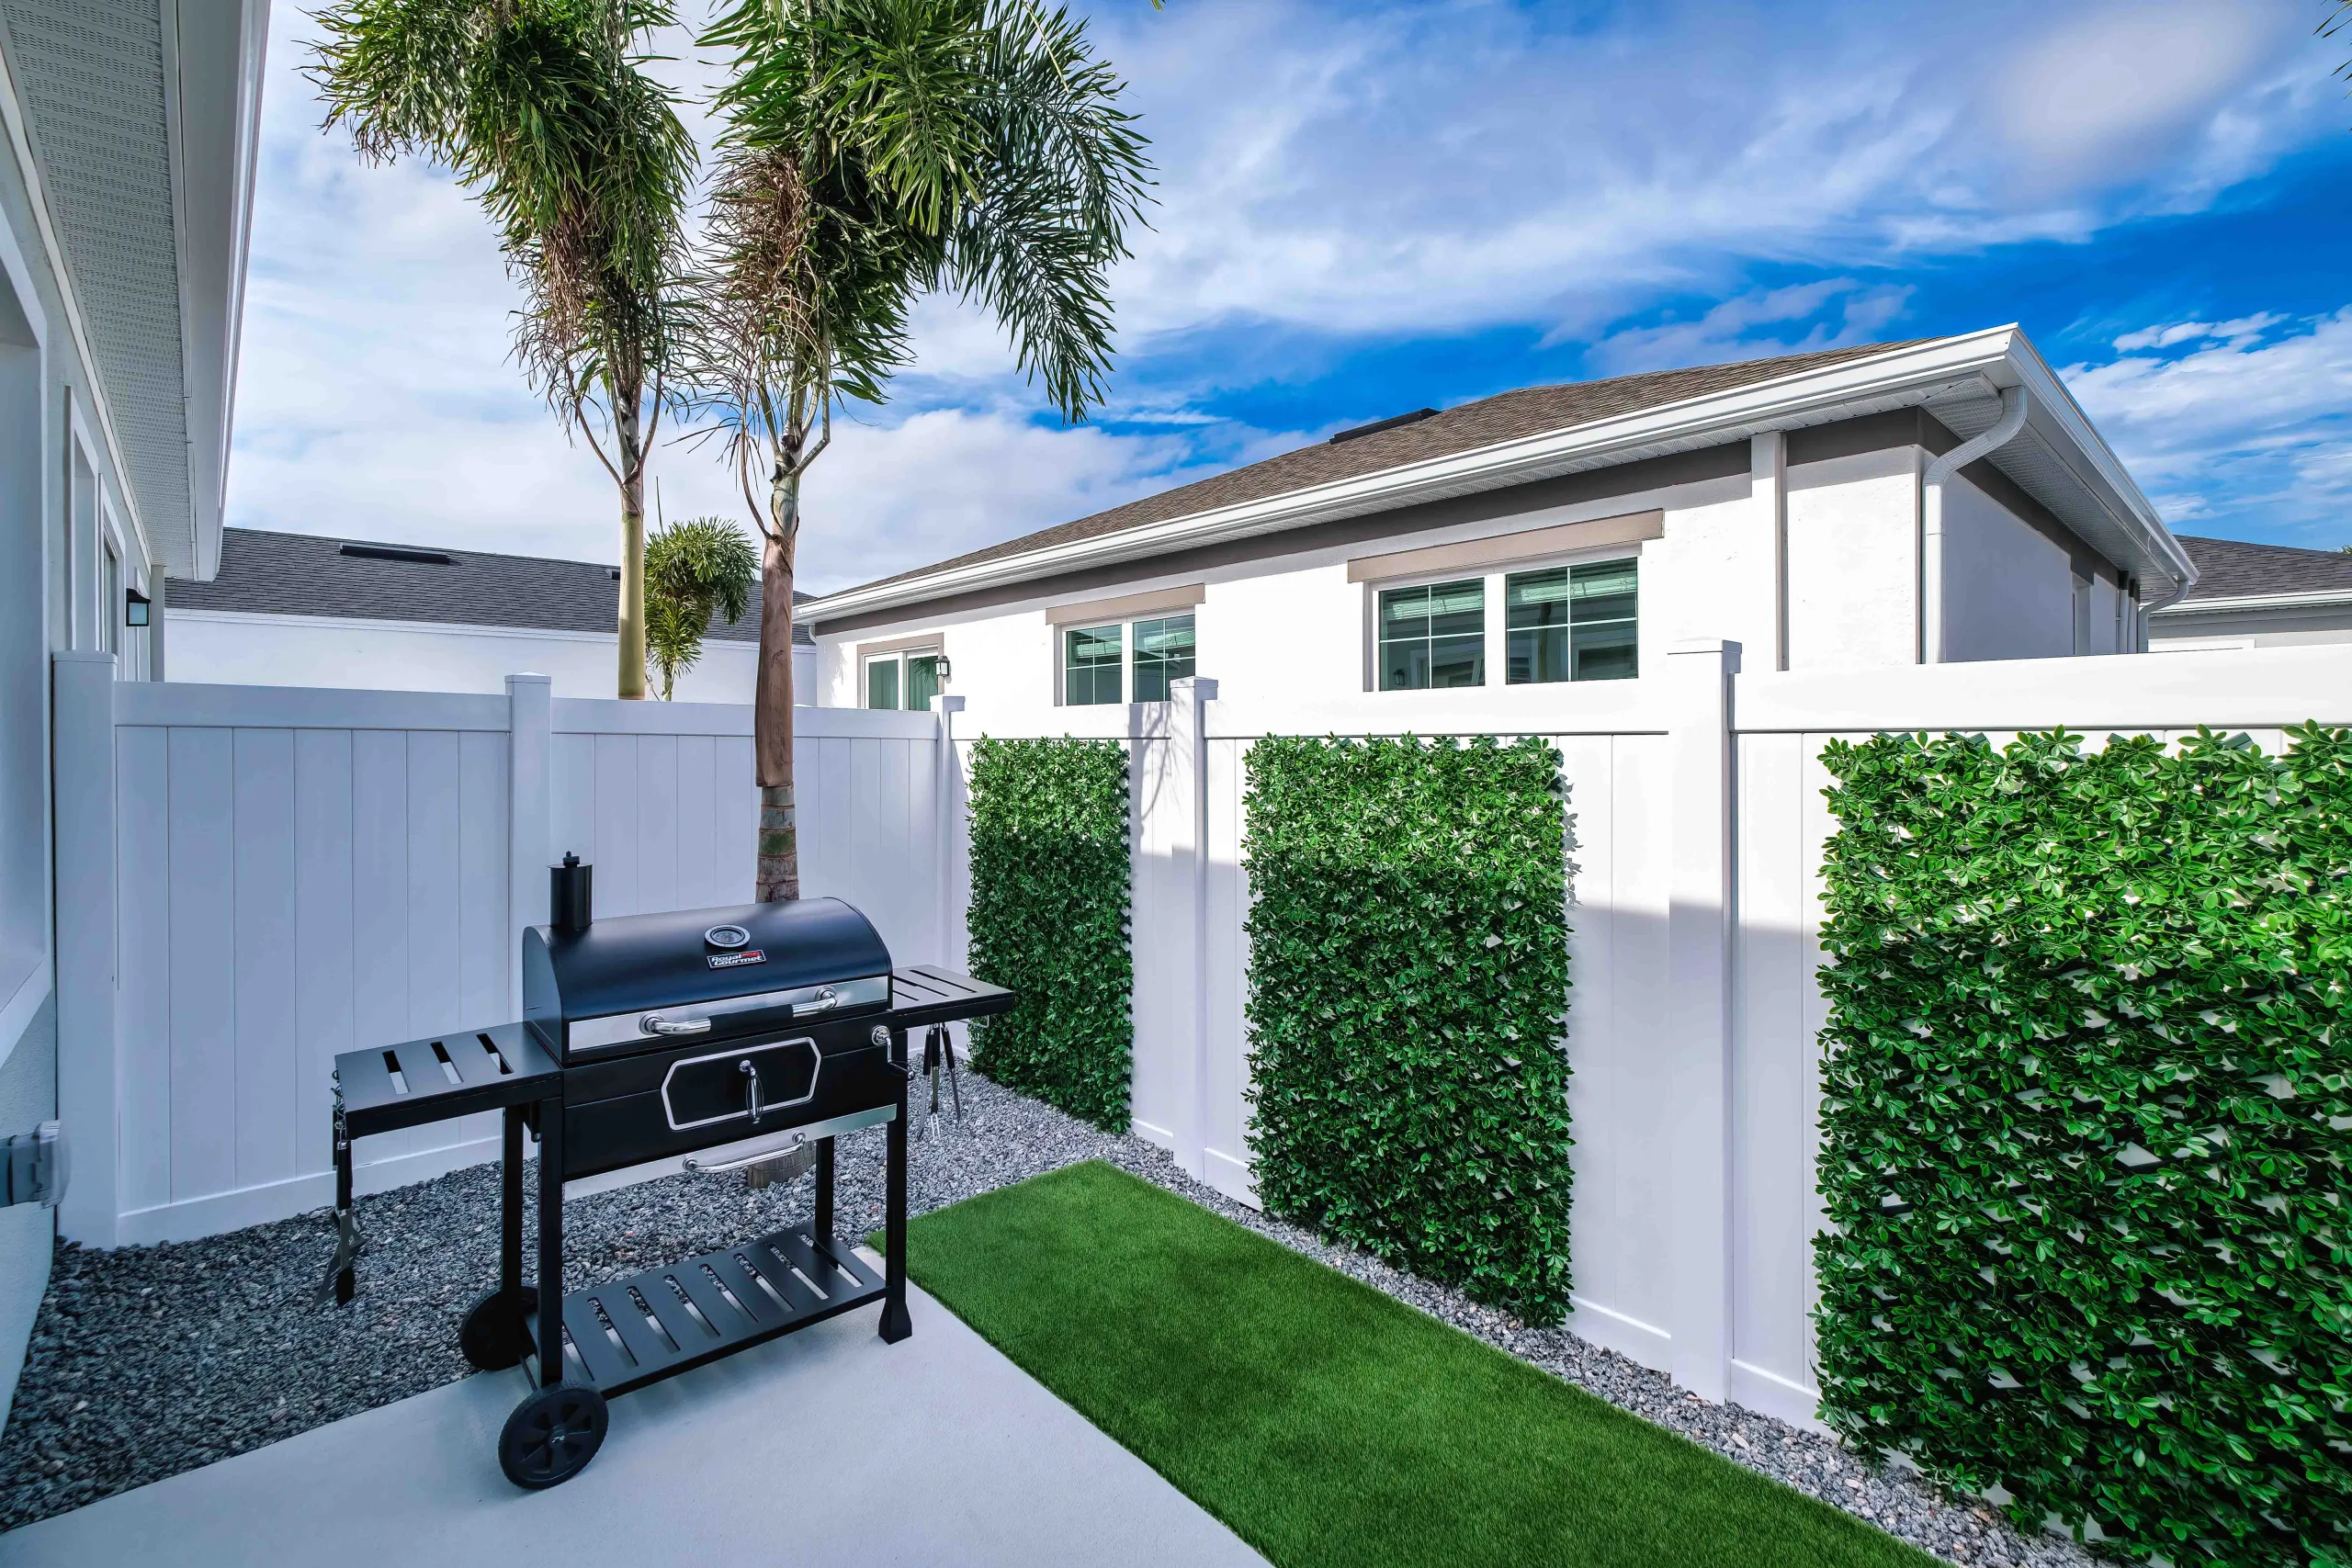 A beautiful white fenced Florida backyard scape with artificial turf, a mature palm tree, seating, a grill, and a patio, on a beautiful breezy sunny day.